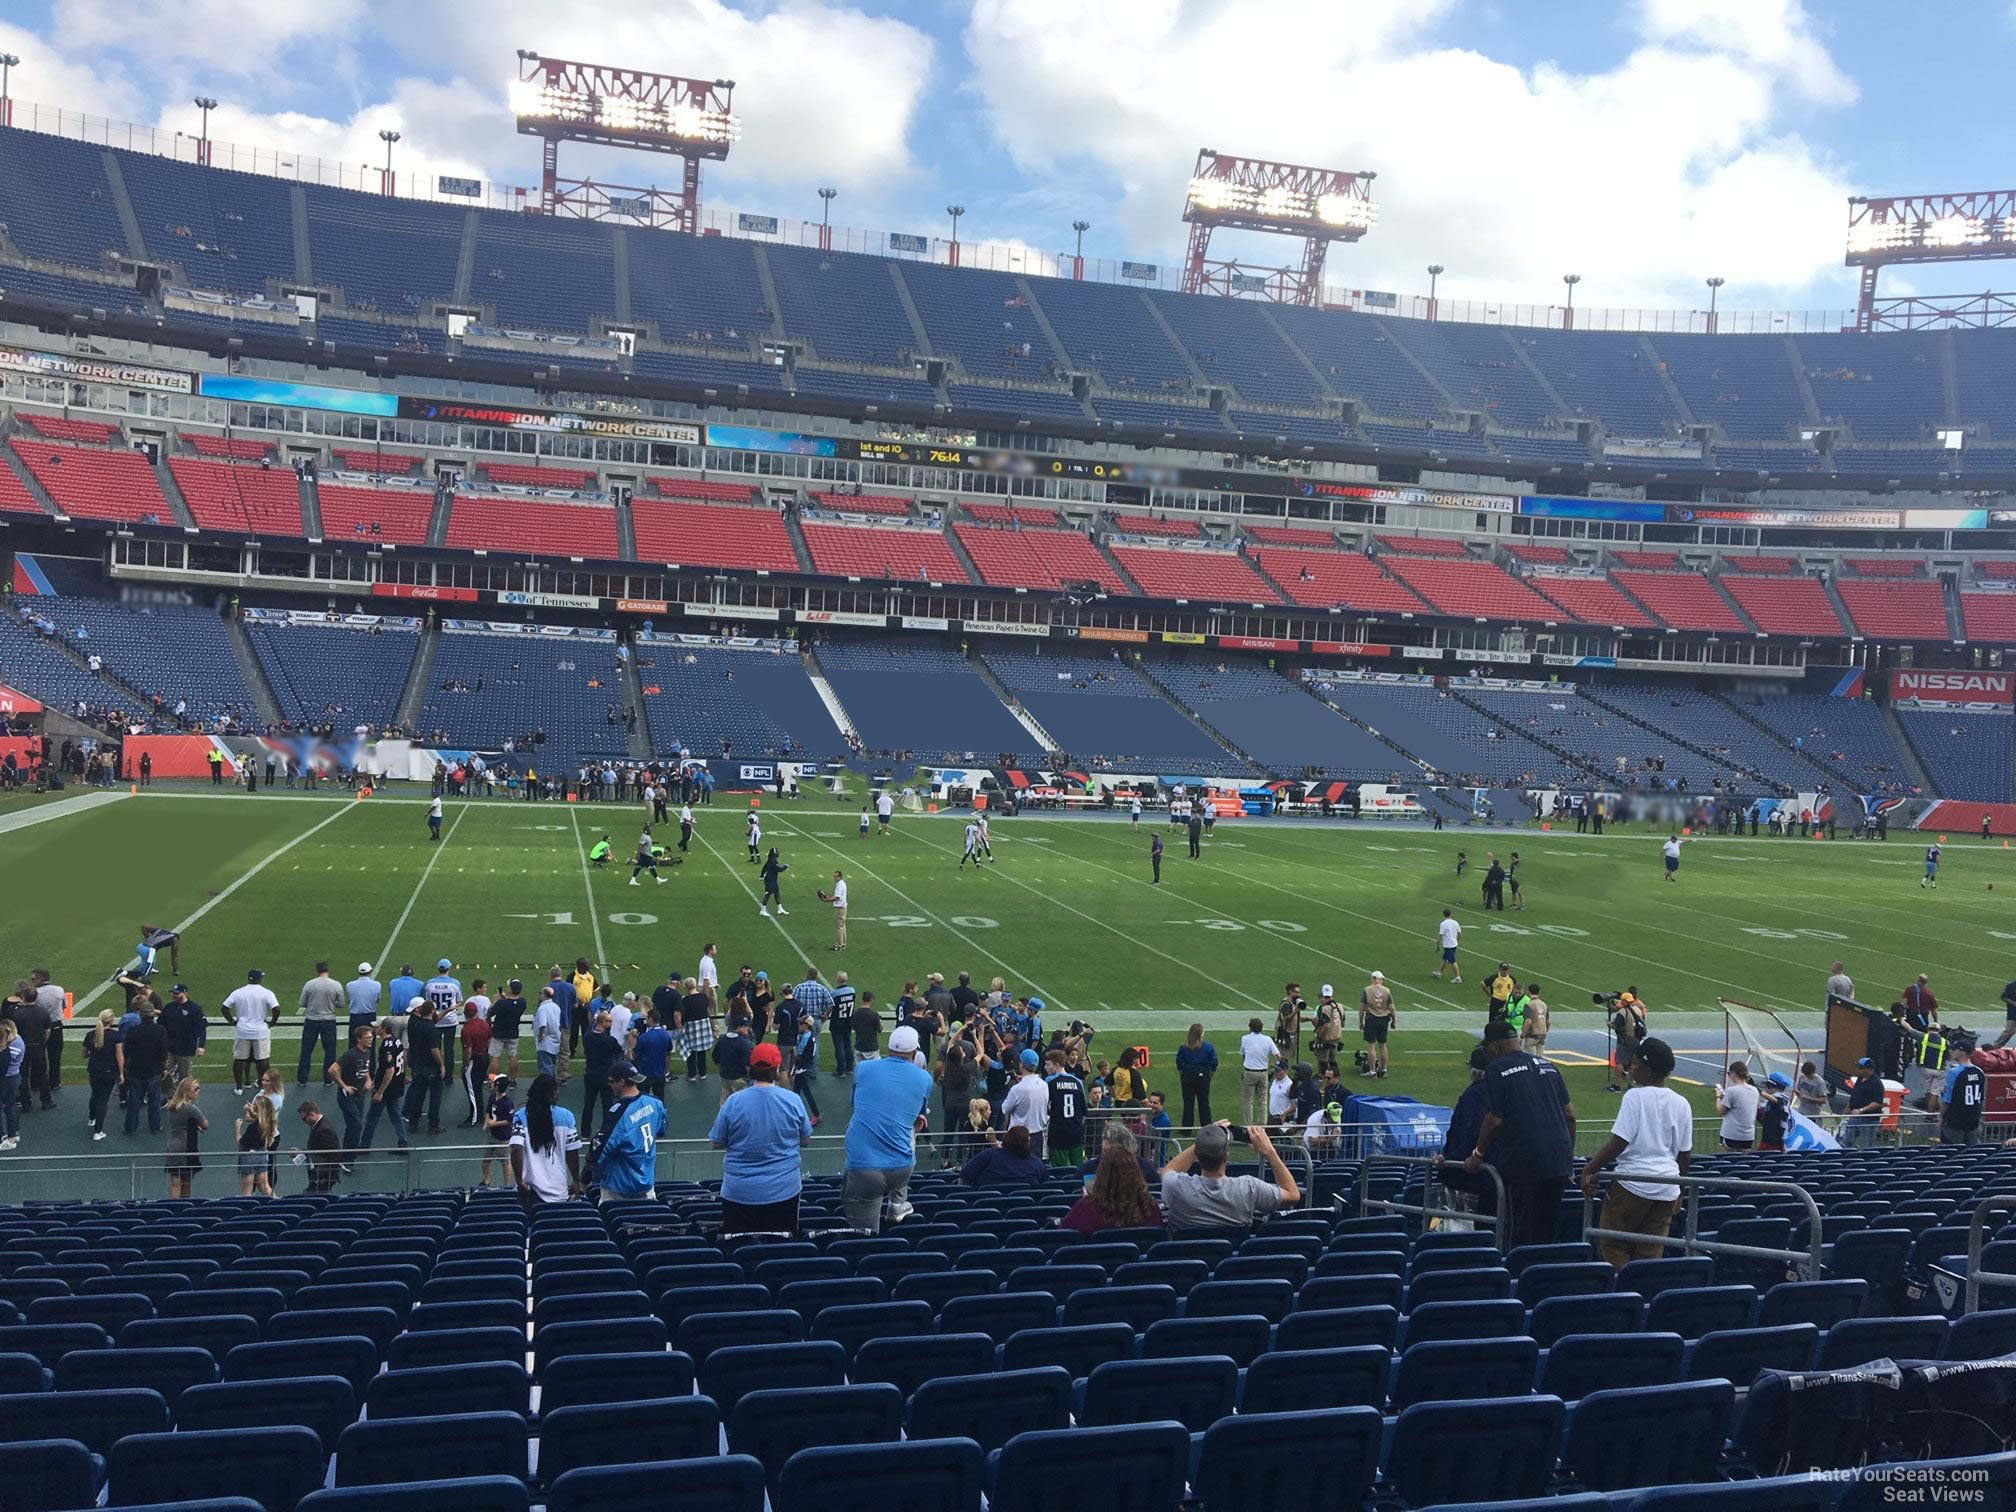 section 138, row aa seat view  for football - nissan stadium